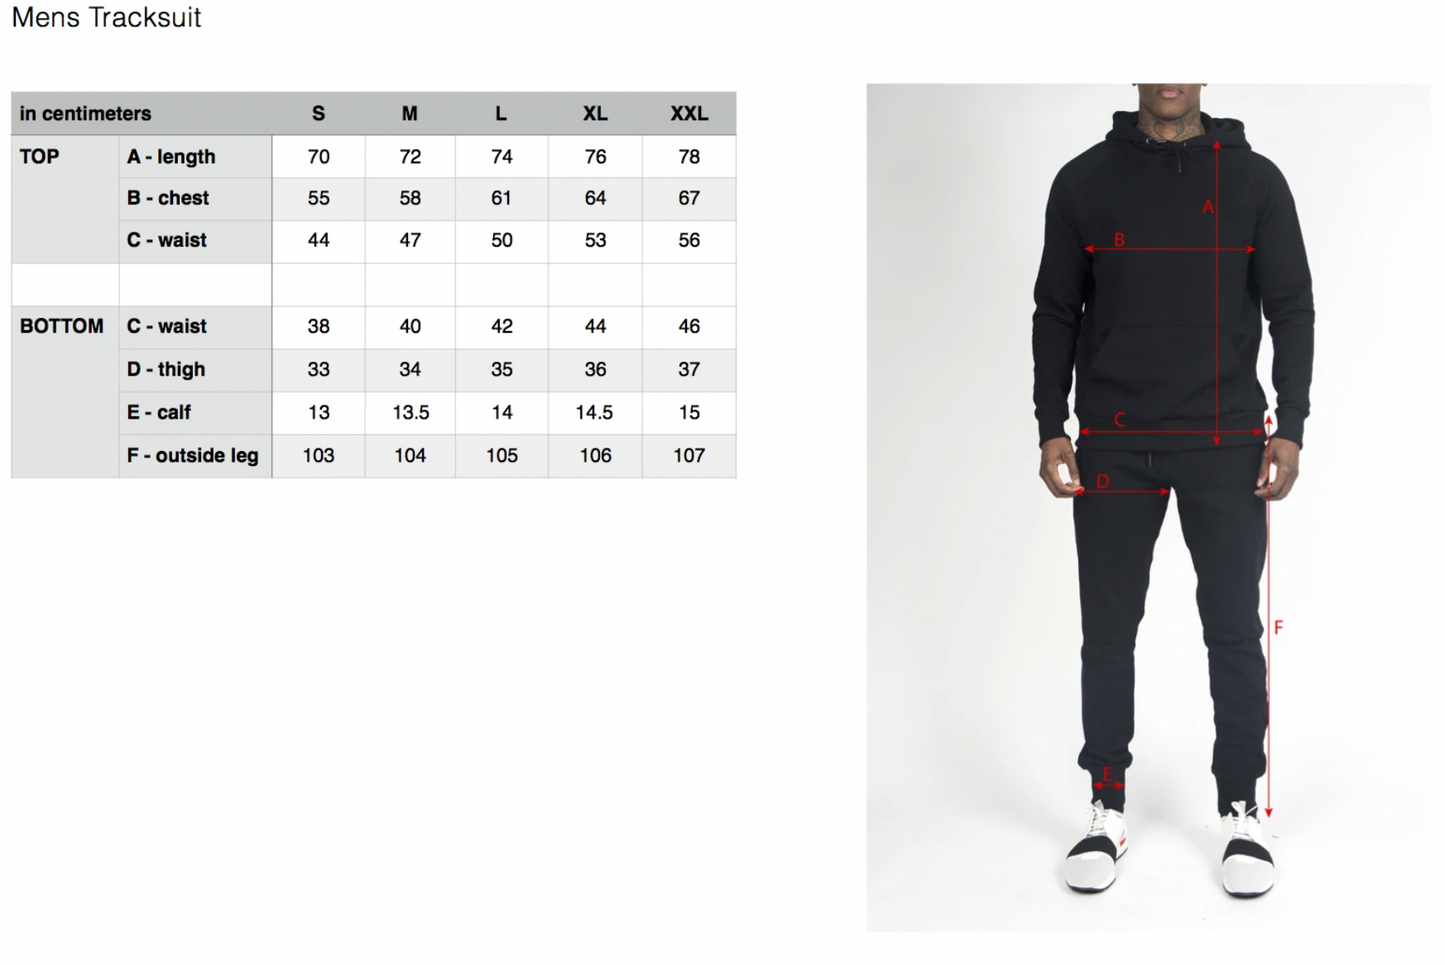 Trapstar Shooters Hoodie And Pants Tracksuit - GREY/ICE FLAVOURS